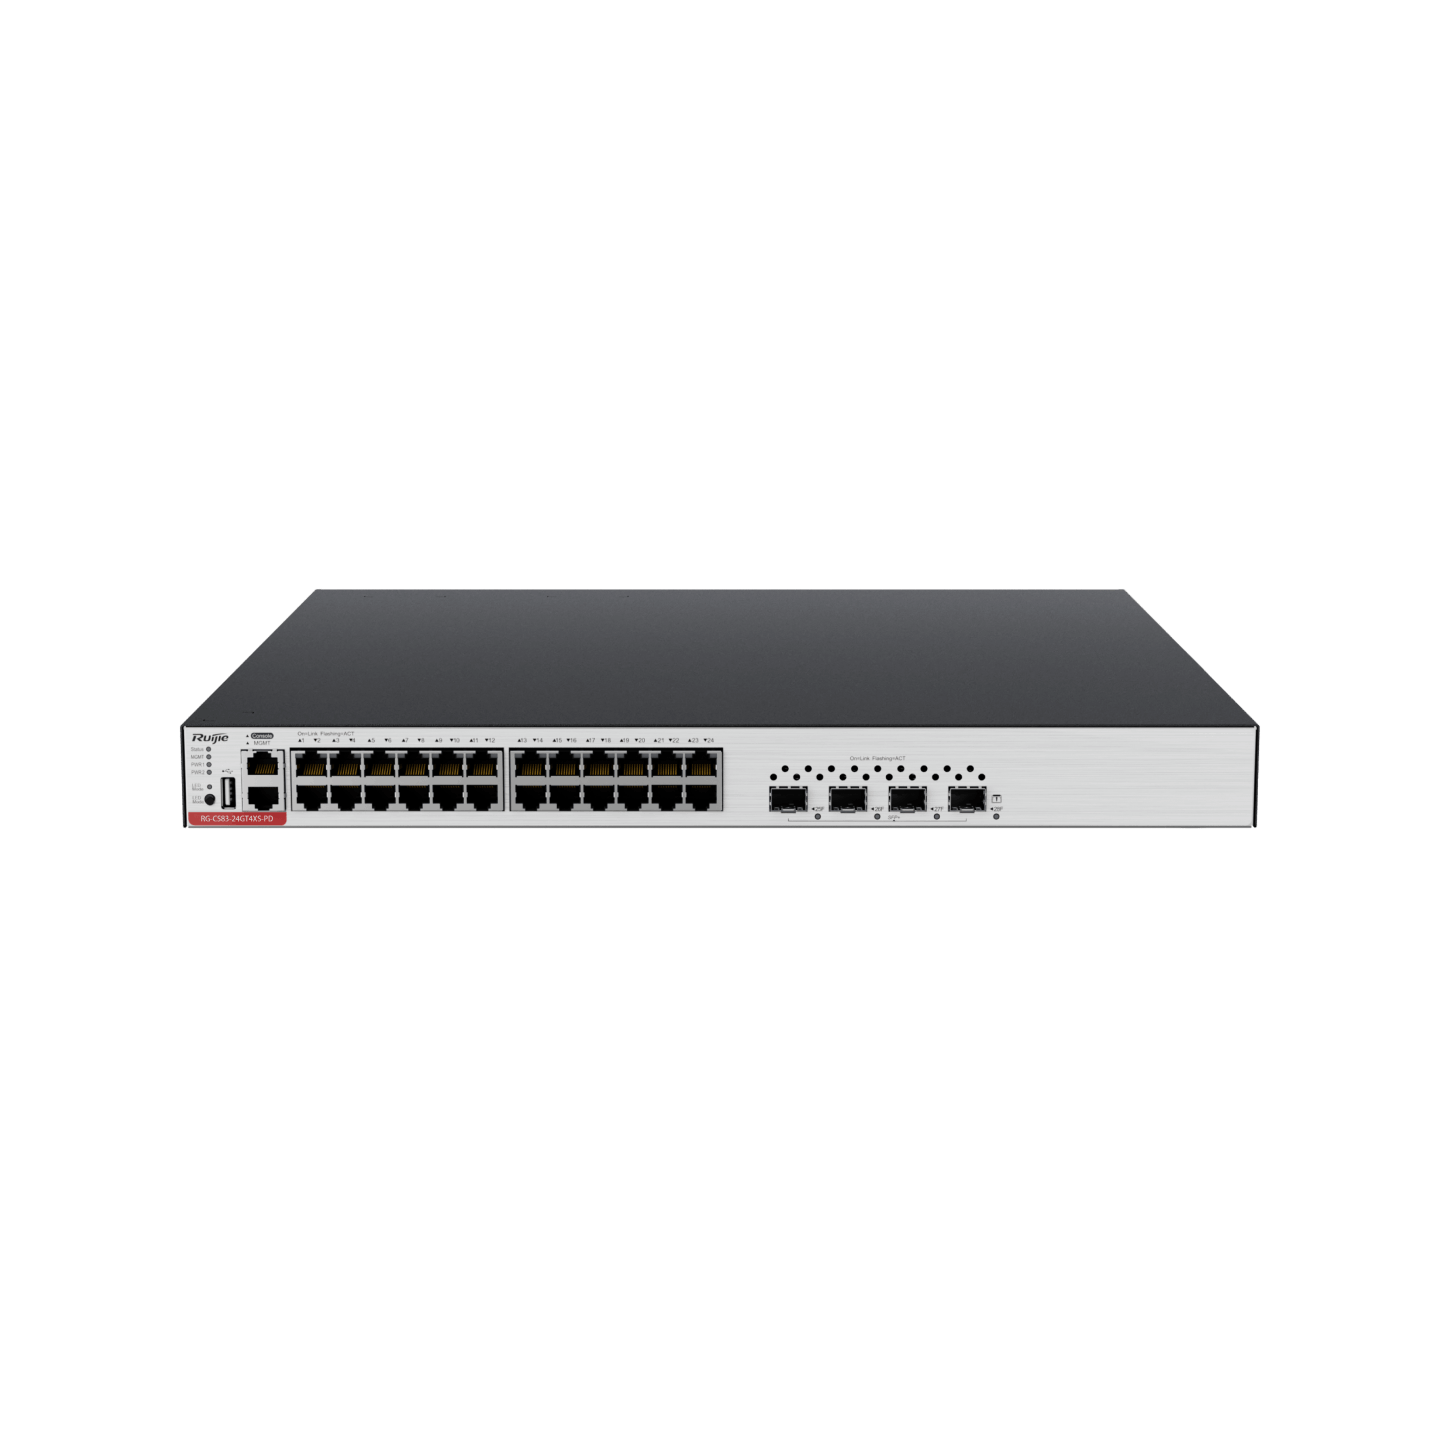 RG-CS83-24GT4XS-PD 24-Port GE Electrical Layer 3 Managed Access Switch with PoE+, 4 × 10G Uplink Ports